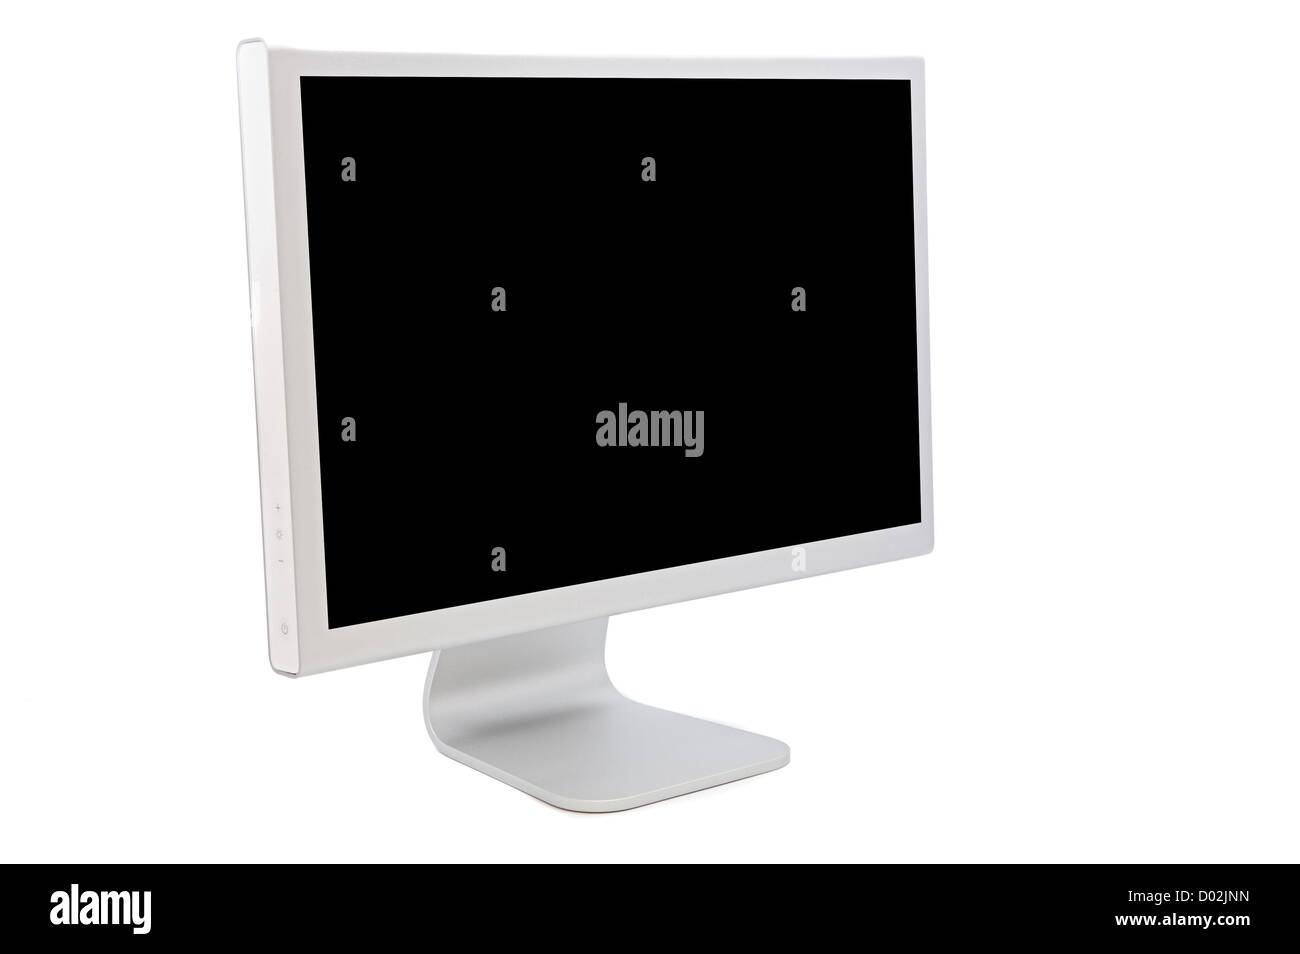 Computer monitor with a black image isolated on white background Stock Photo